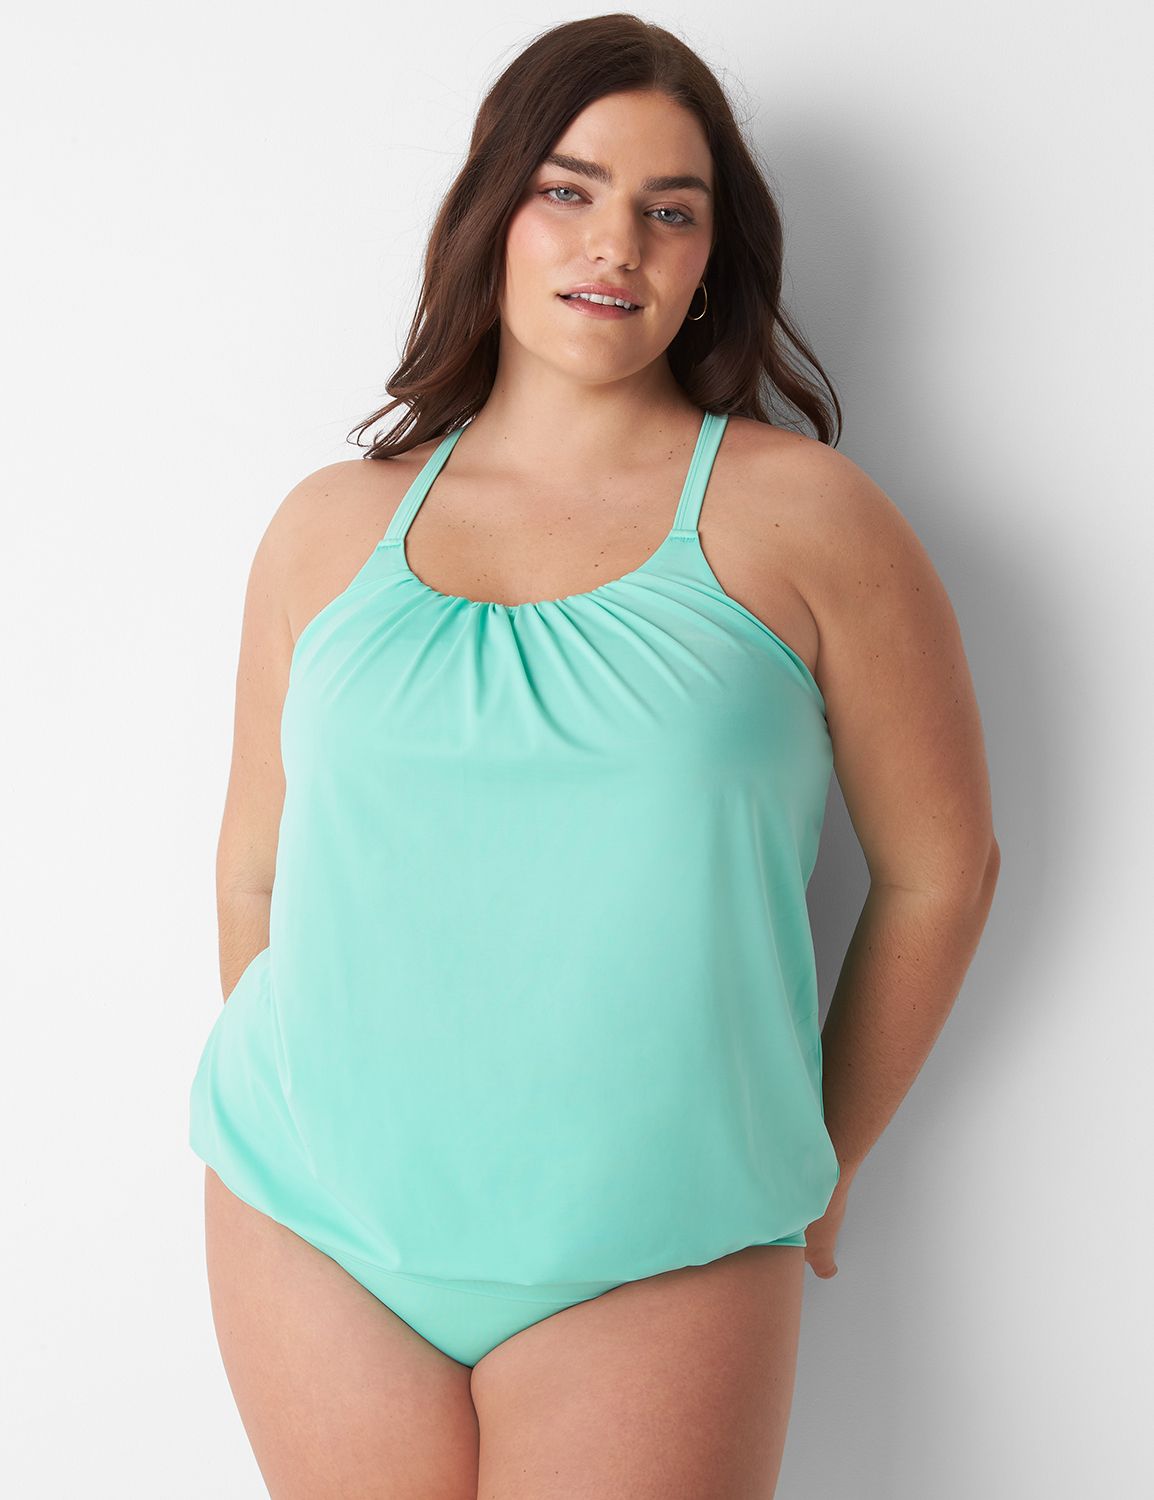 Sexy Basics Tank Top -Body Suit | Juniors Teens Petite Sized Cotton Rib  Stretch Onsies | 6 Pack & 12 Pack